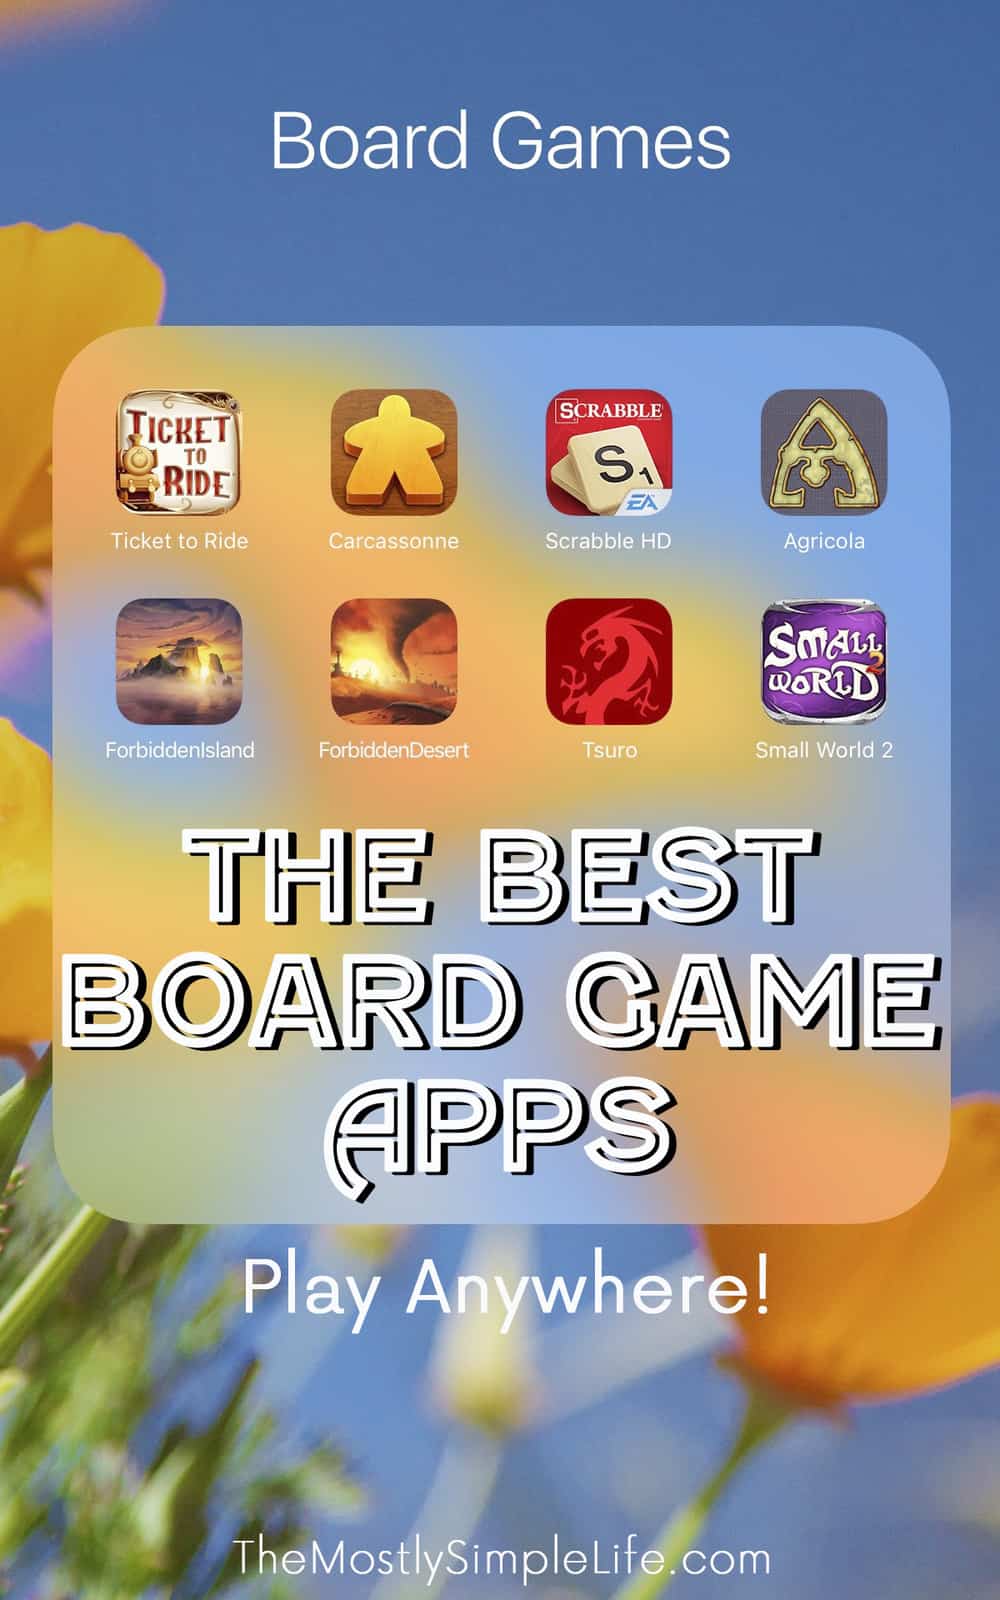 The Best Board Game Apps - Play Anywhere! - The (mostly ...